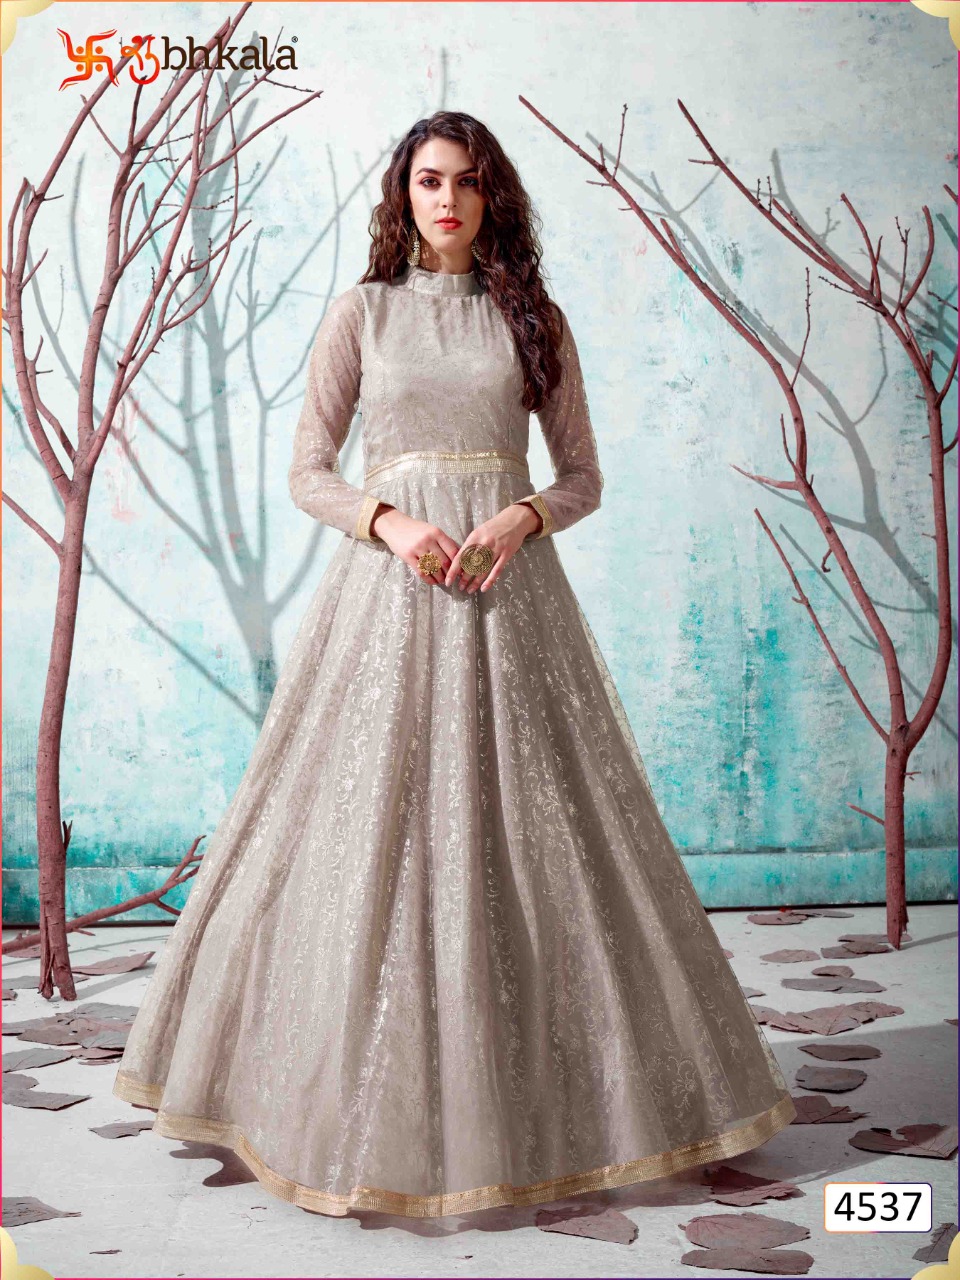 Latest Indian Gown Dresses Online for Women